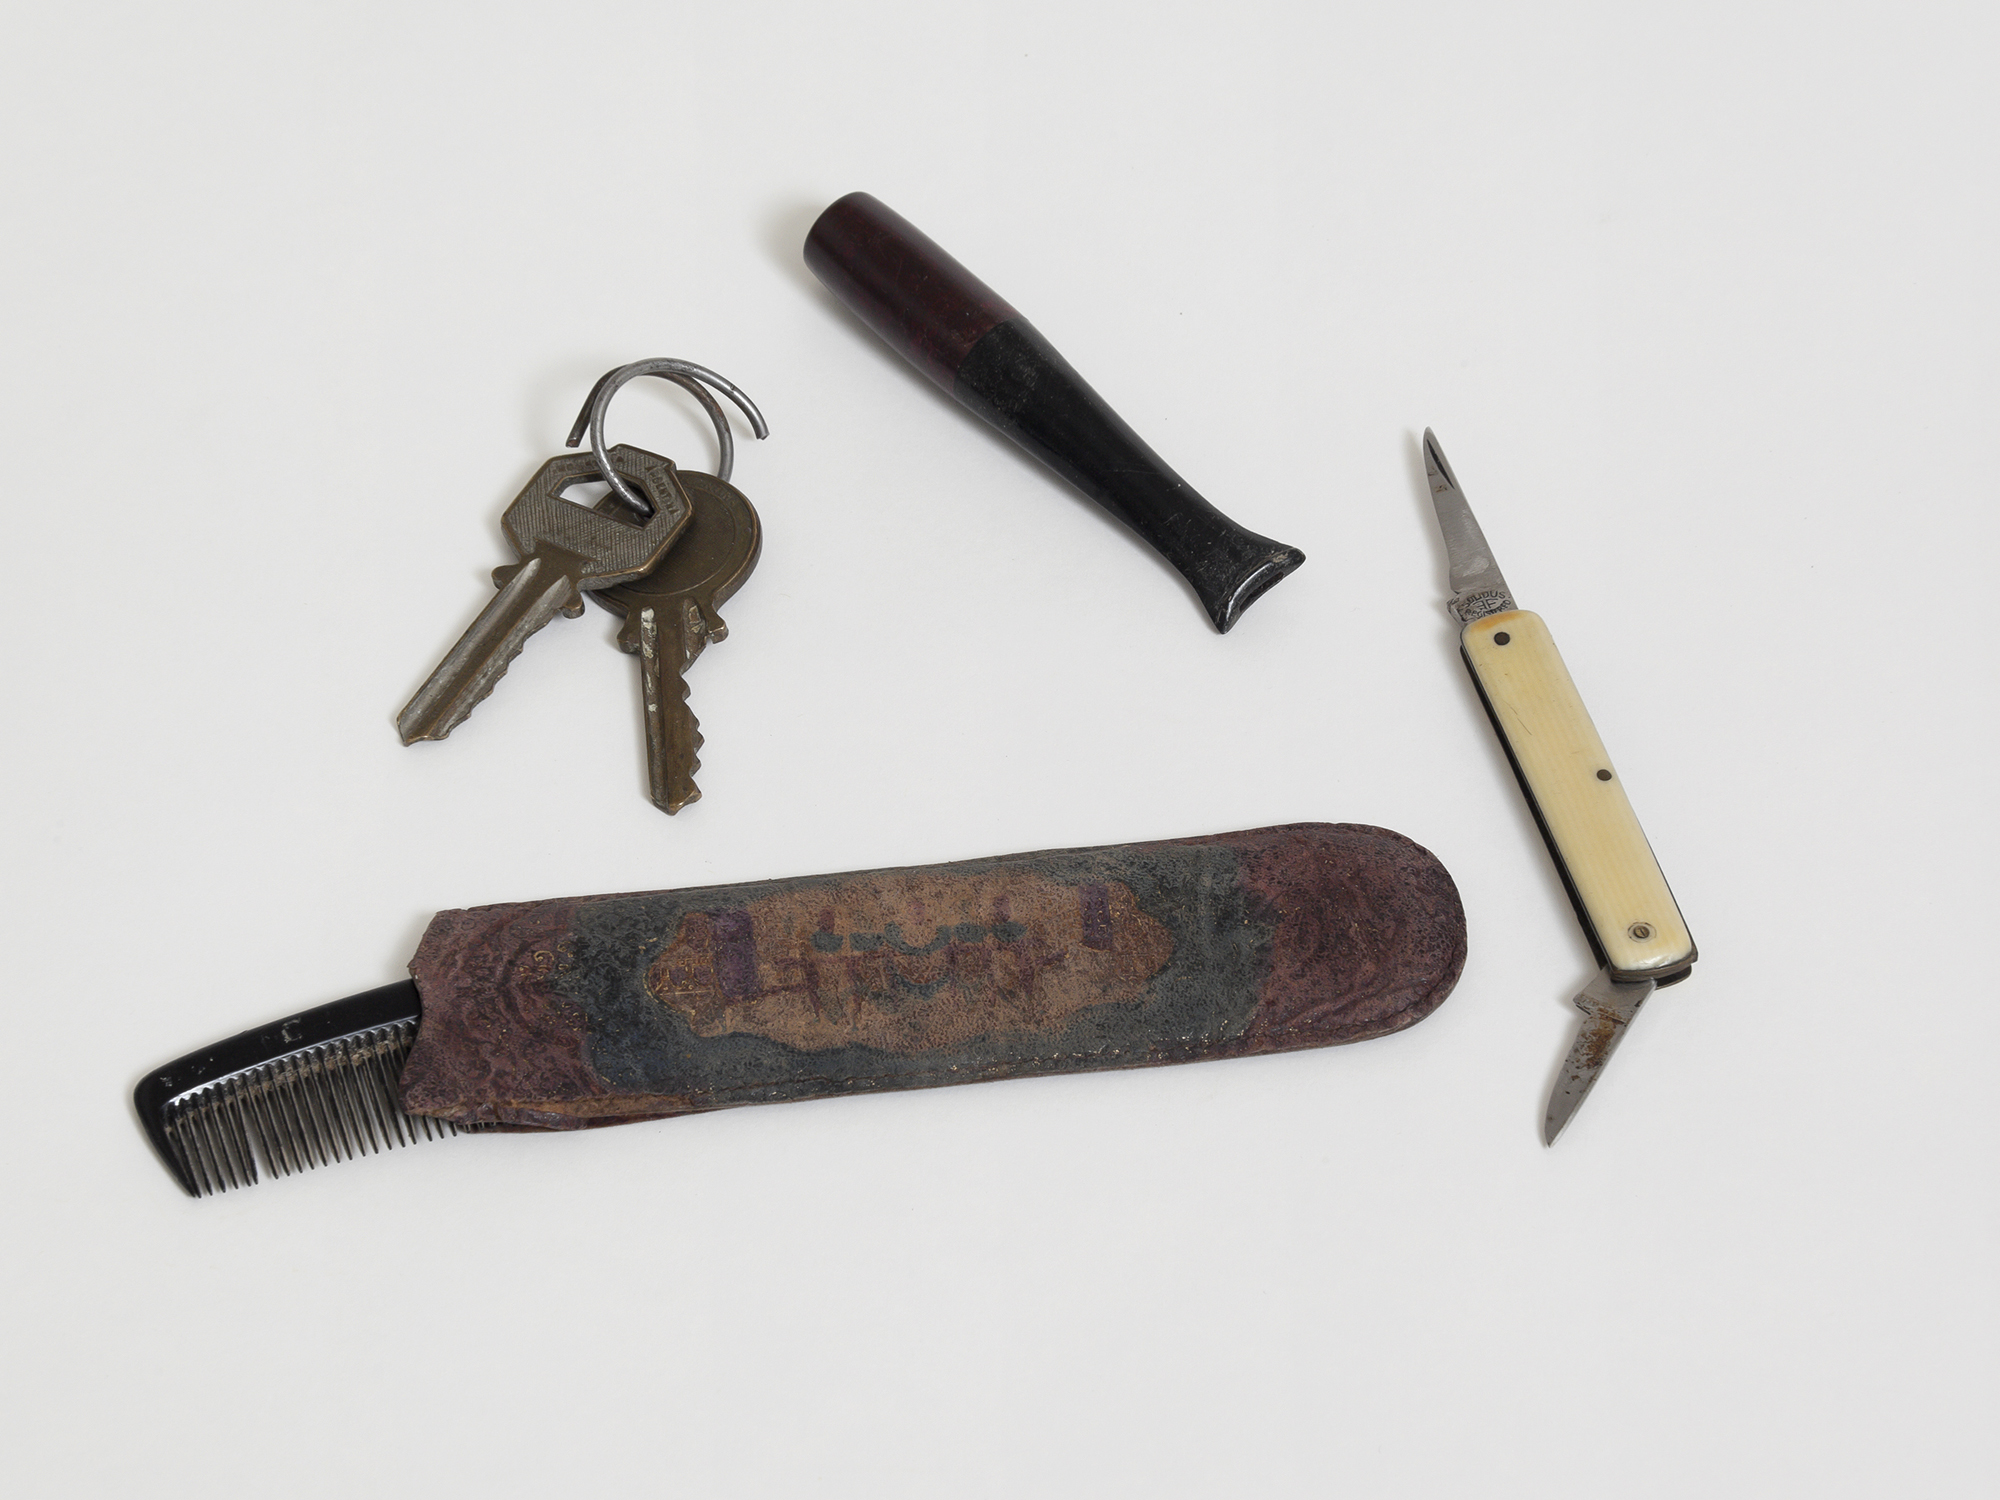 Comb, pocket knife, cigarette holder and keys to the house on Garibaldi Street found on Adolf Eichmann the night he was captured, May 11, 1960 Photo courtesy of Mossad Archive